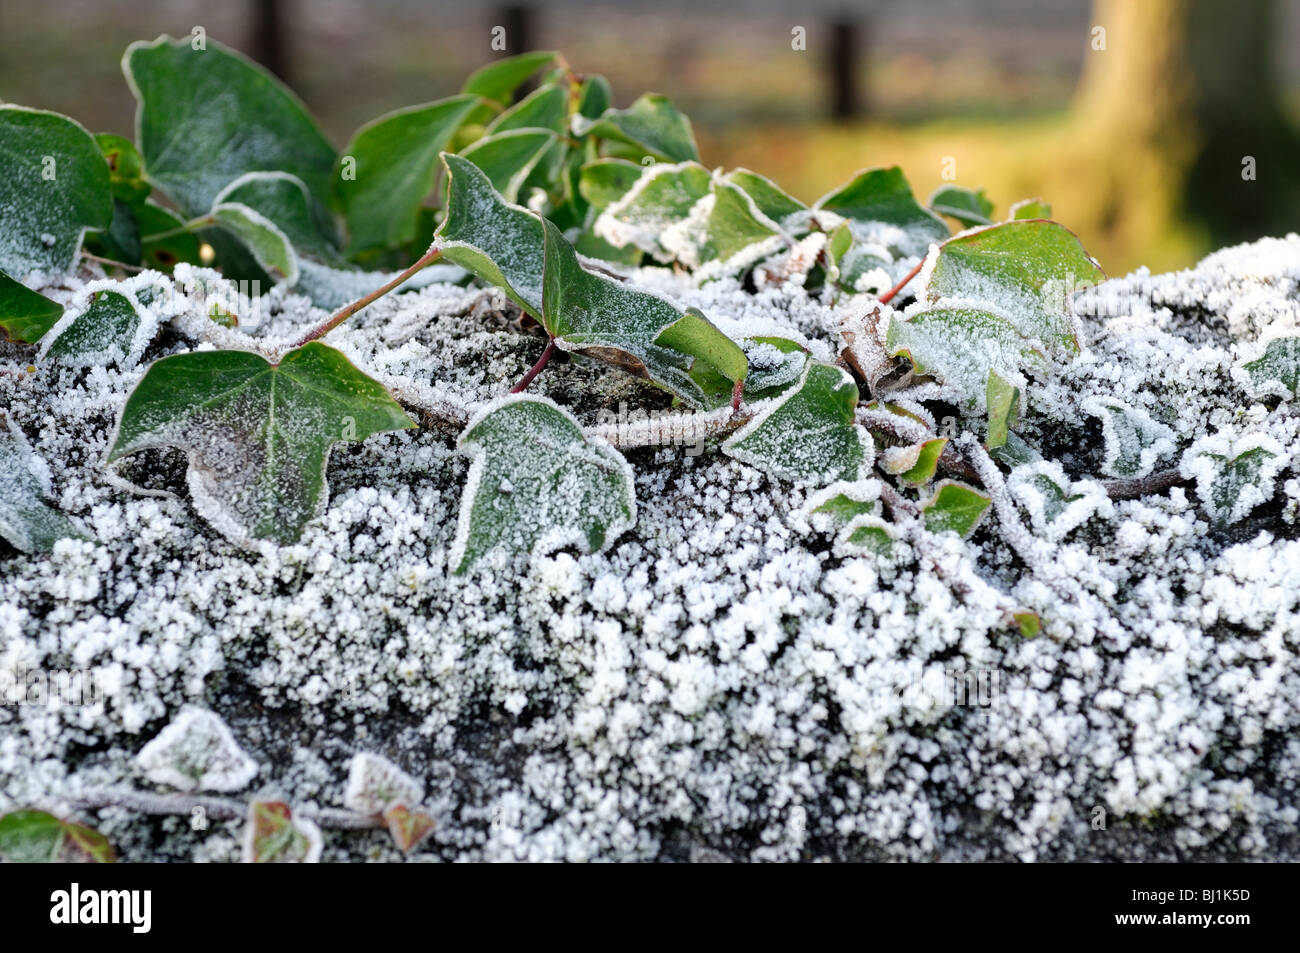 Hedera ivy ivies climbing ground-creeping evergreen woody plants Araliaceae bindwood lovestone hoar frost cover white contrast Stock Photo